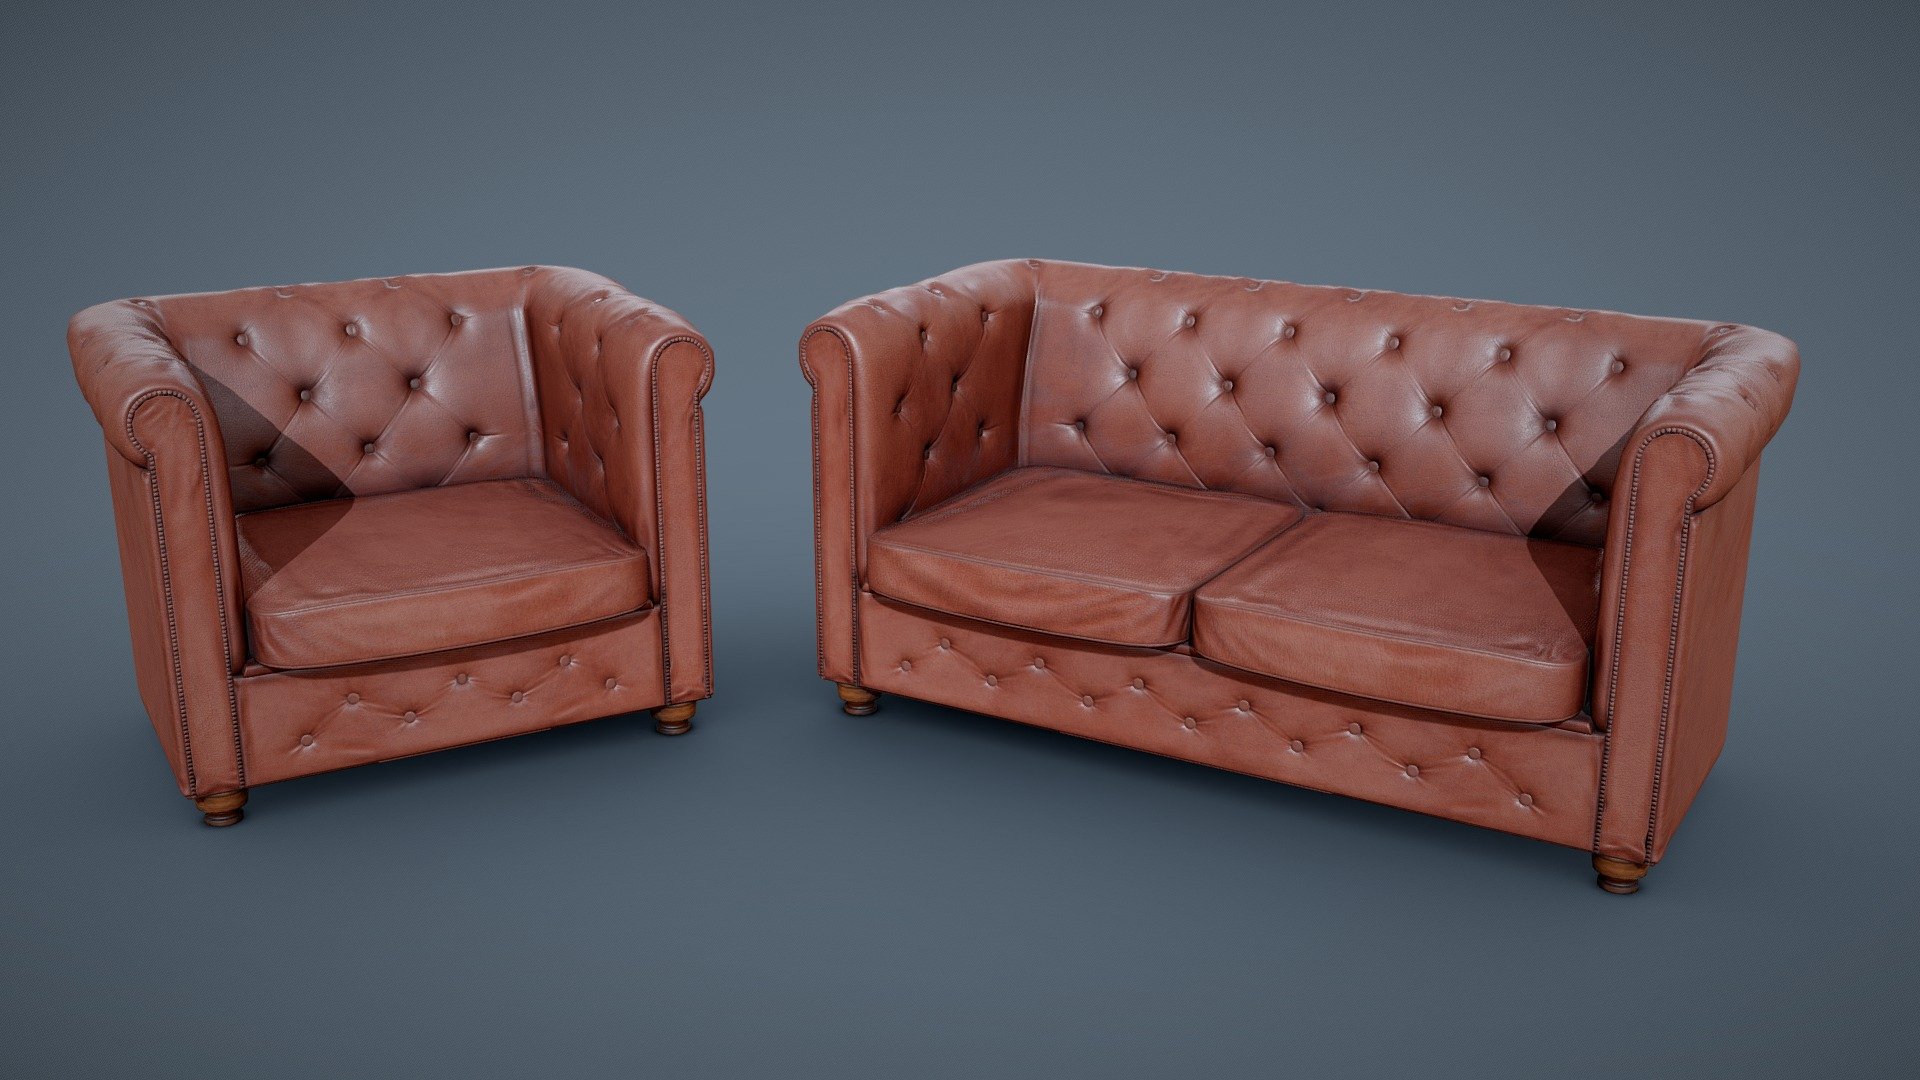 Chesterfield style sofa set. Antique and well worn.

Armchair: 5,348 tris

Sofa: 6,989 tris - Antique leather sofa set - Game Model - Buy Royalty Free 3D model by Lorenzo Drago (@LorenzoDrago) 3d model